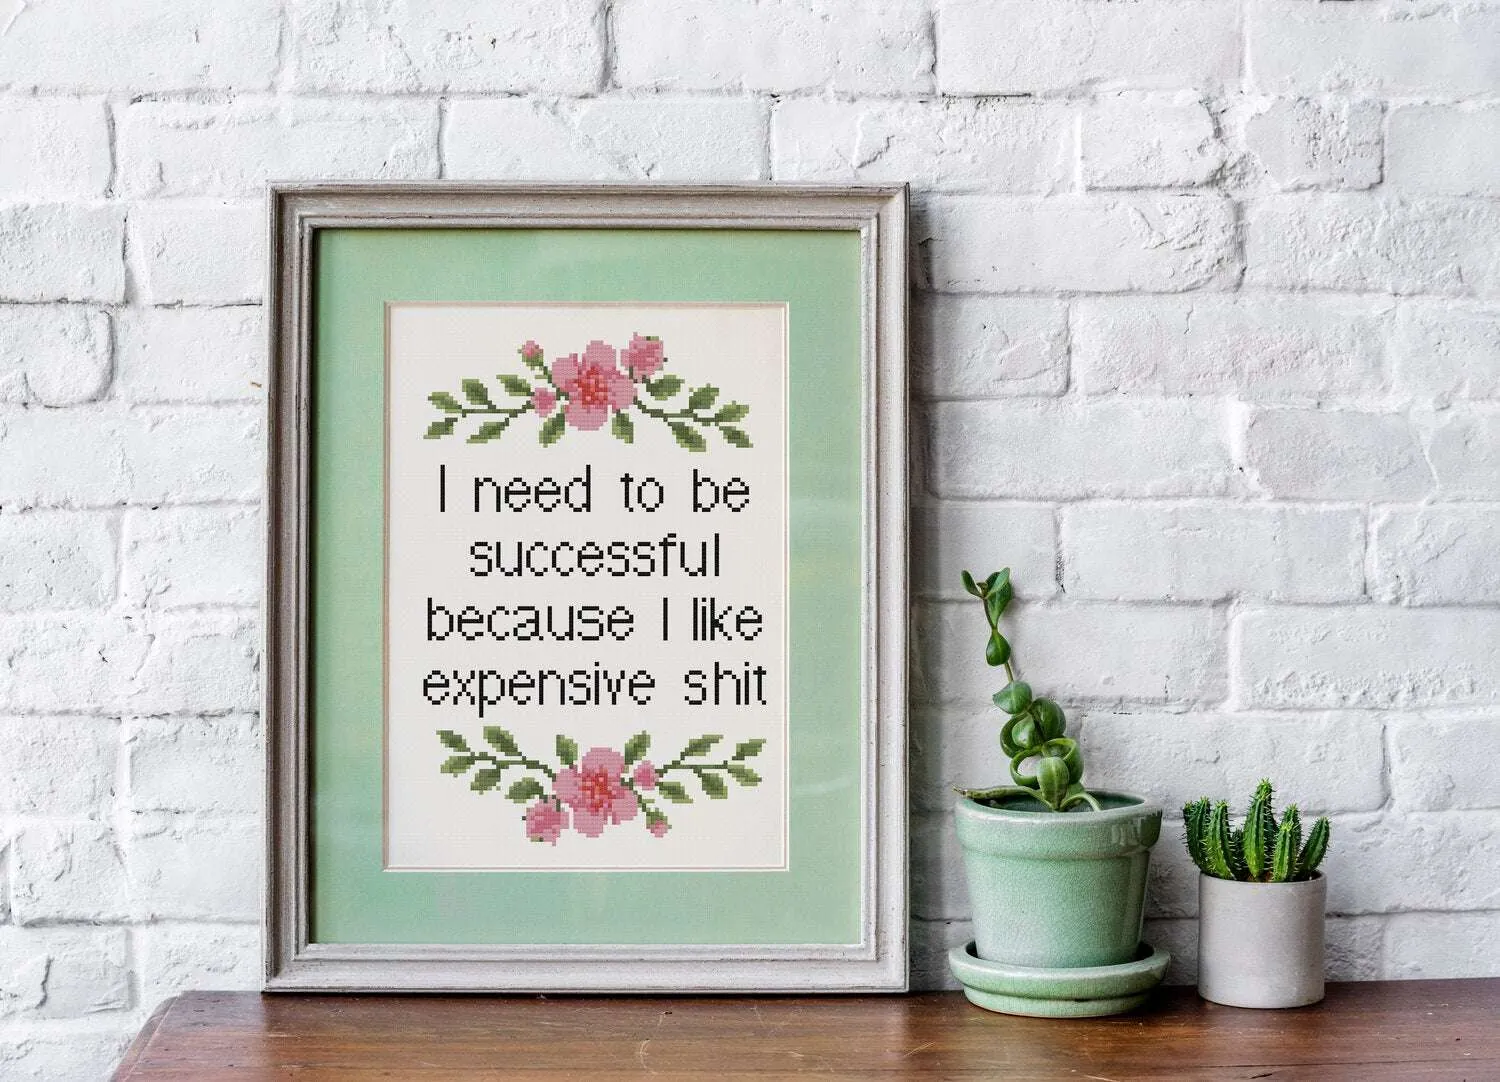 Framed cross stitch reading 'I need to be successful because I like expensive shit' in black with floral designs above and below